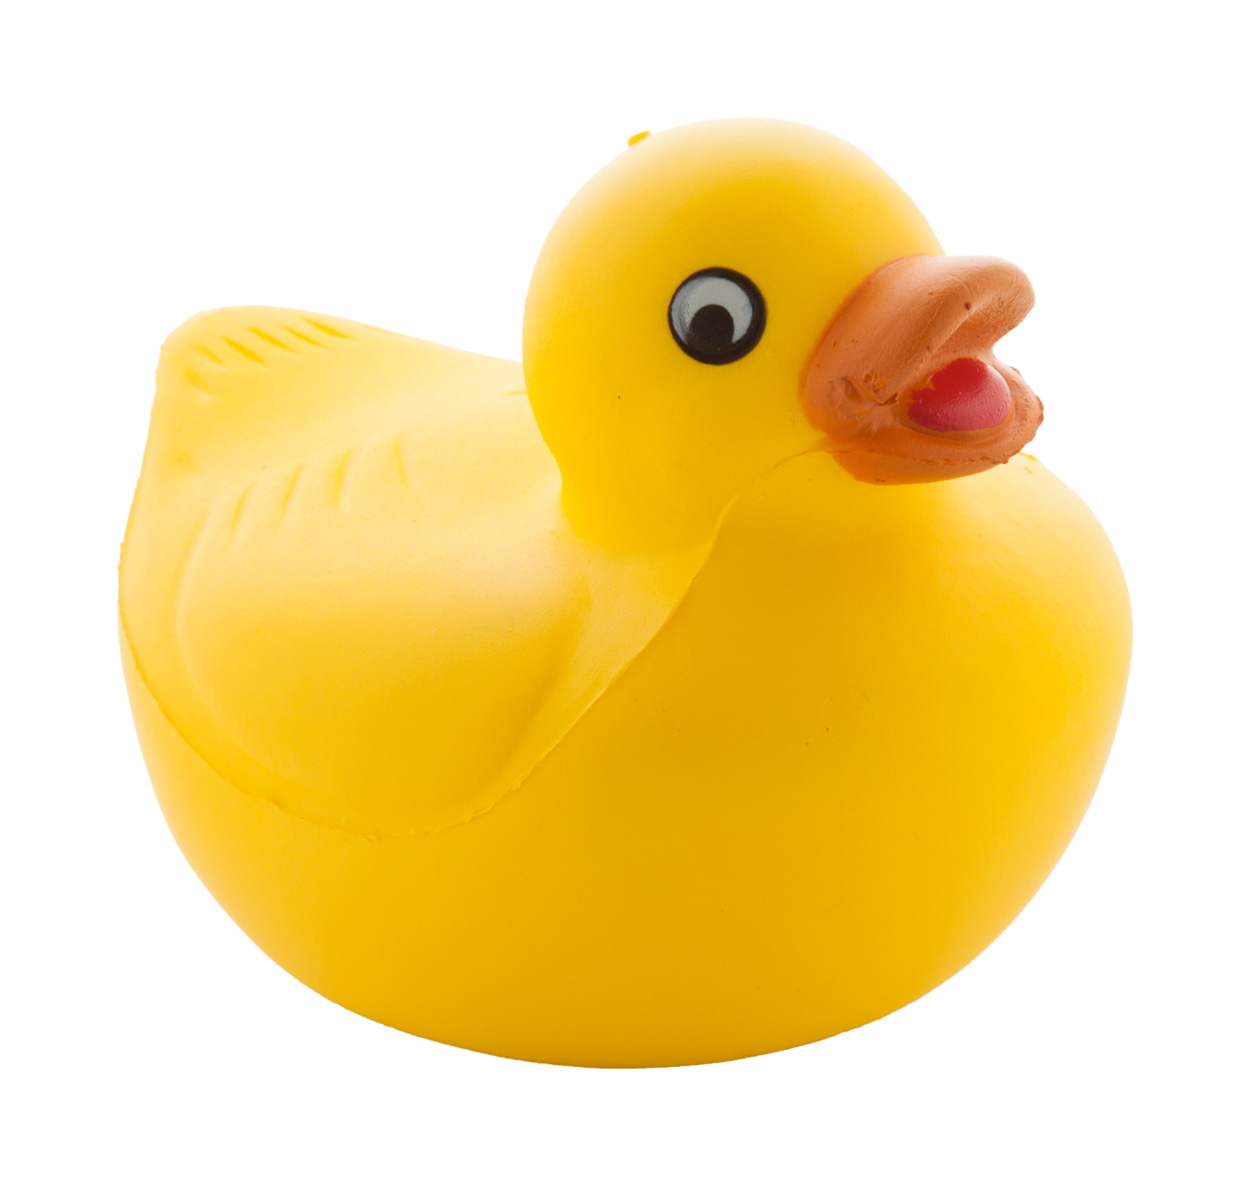 Anti-stress gadget QUACK in the shape of a duck - yellow